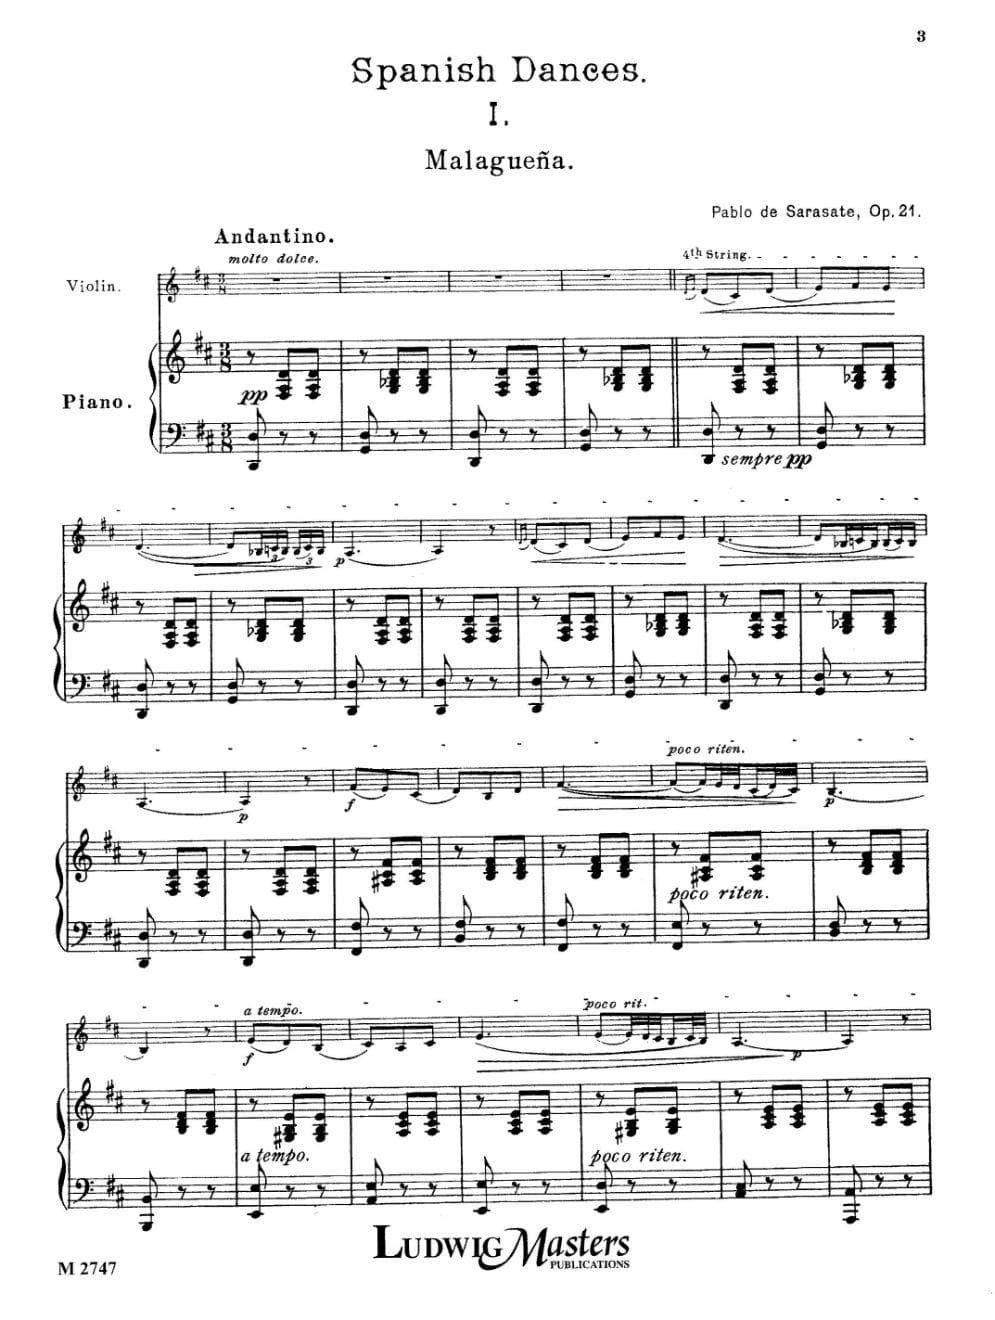 Sarasate, Pablo - Spanish Dances, Volume 1, Op 21 For Violin and Piano Published by Masters Music Publishing Co